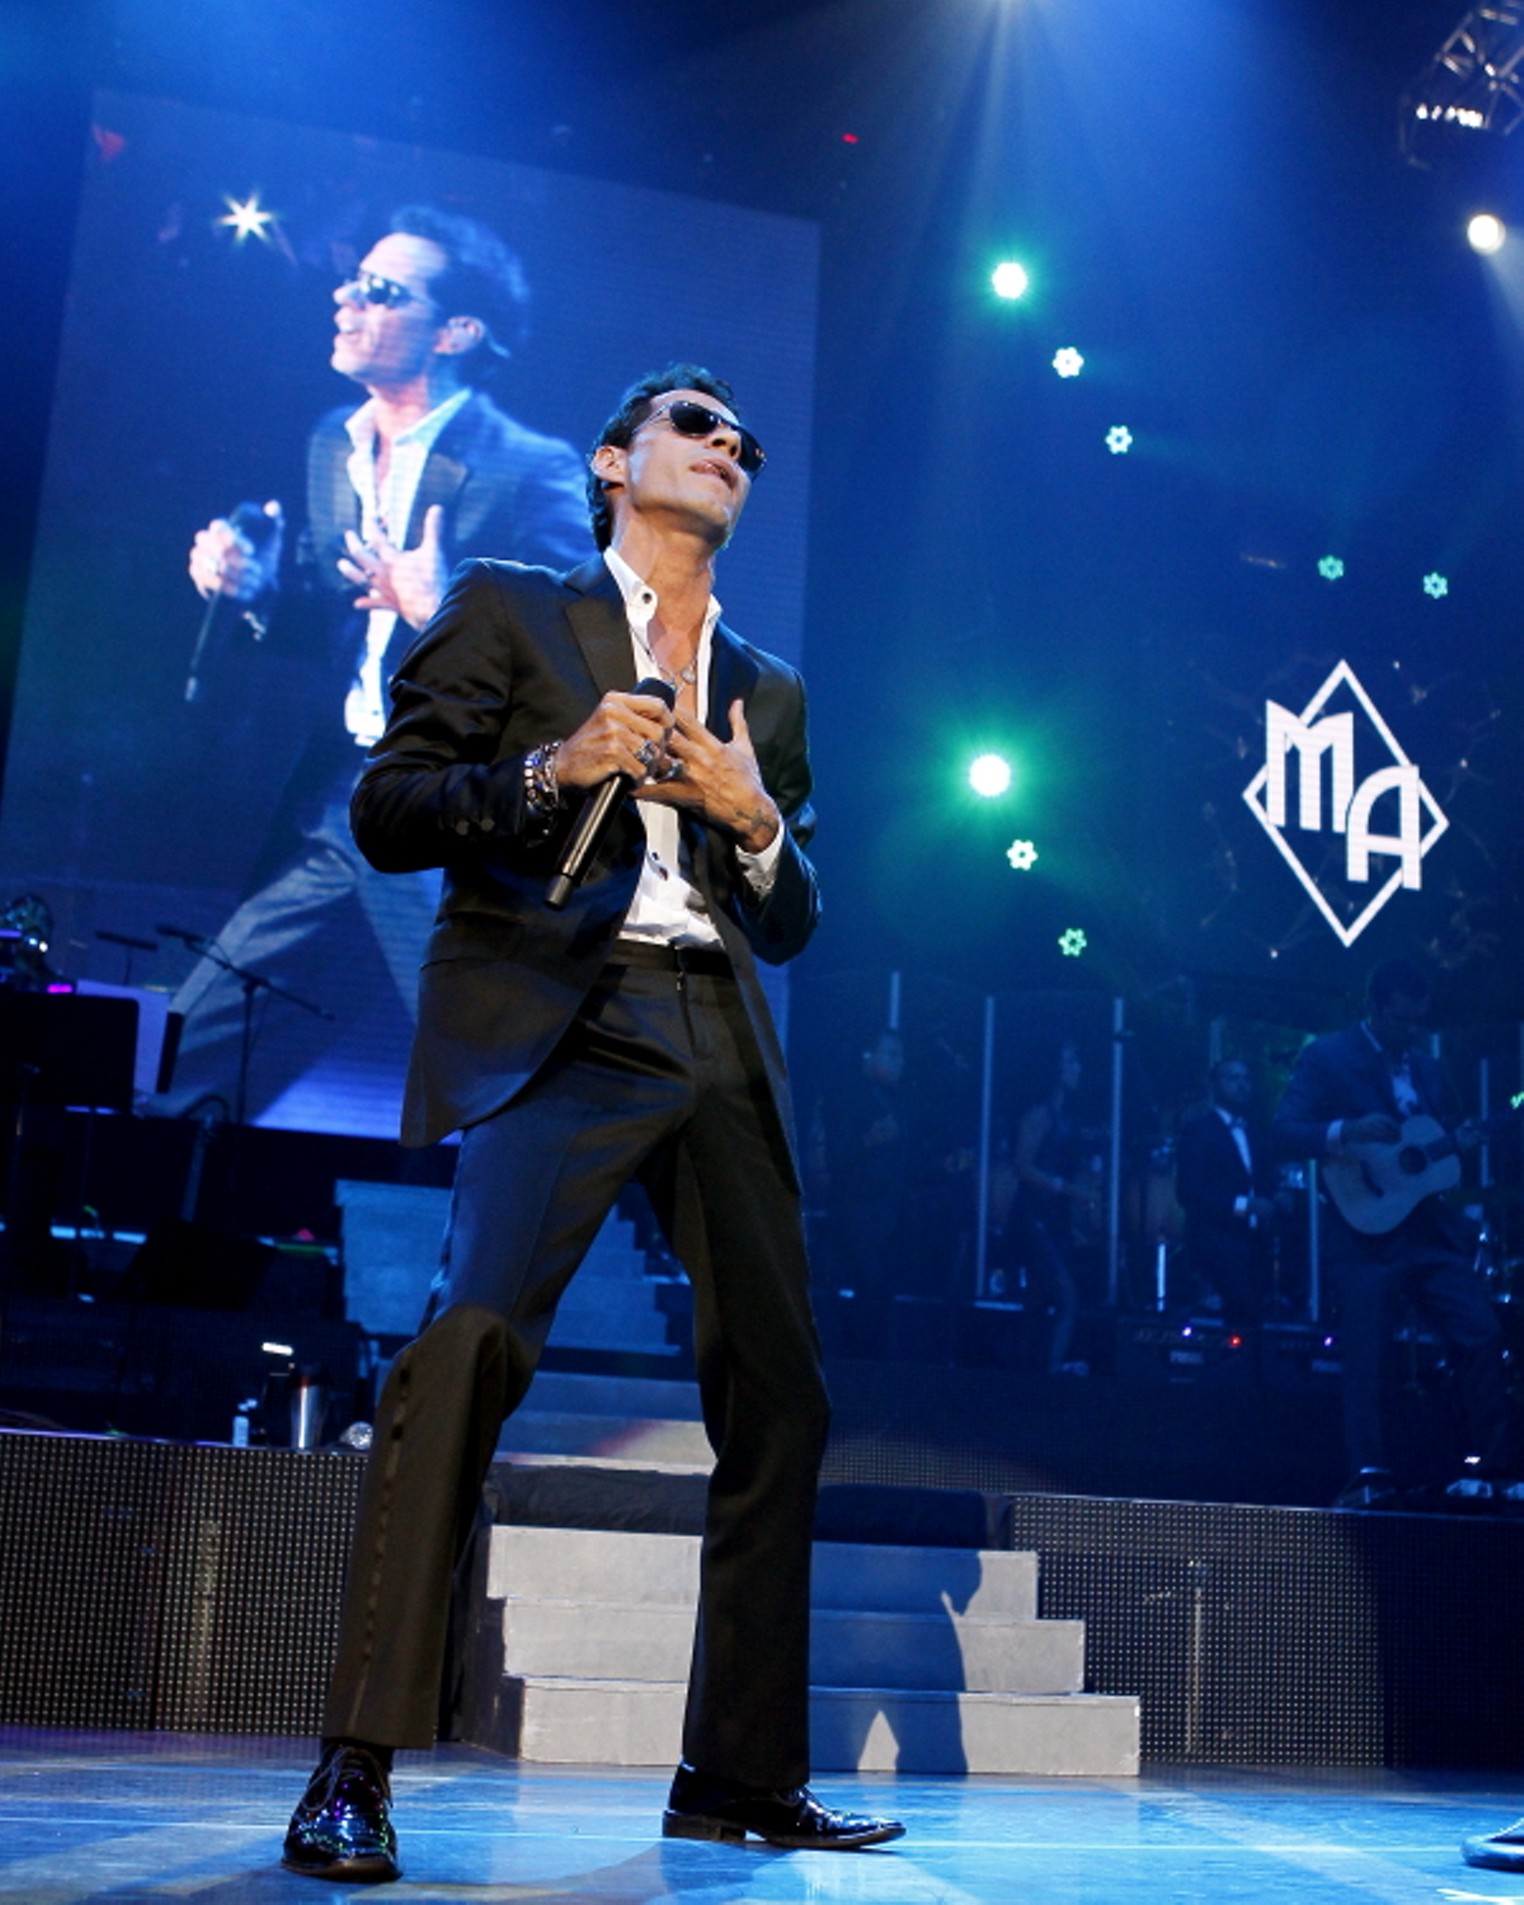 All 105+ Images marc anthony @ americanairlines arena in miami, fl, americanairlines arena, november 19 Excellent